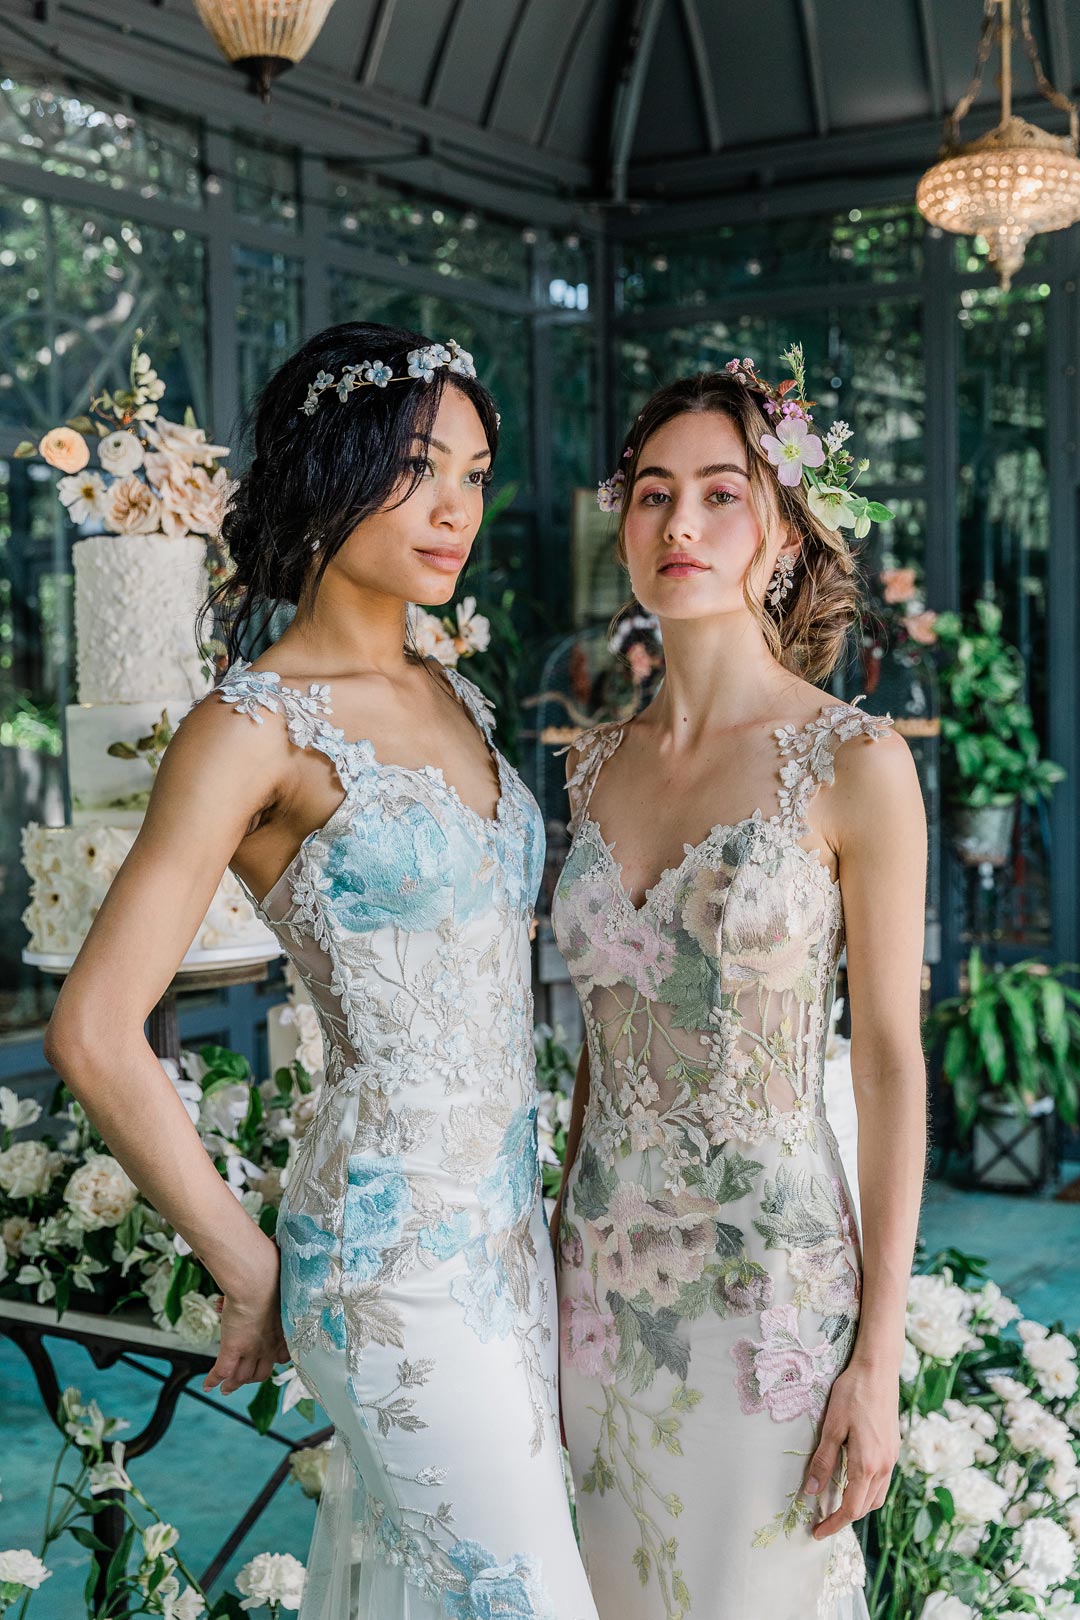 Colorful Wedding Dresses Odessa Blue and Peony by Designed Claire Pettibone